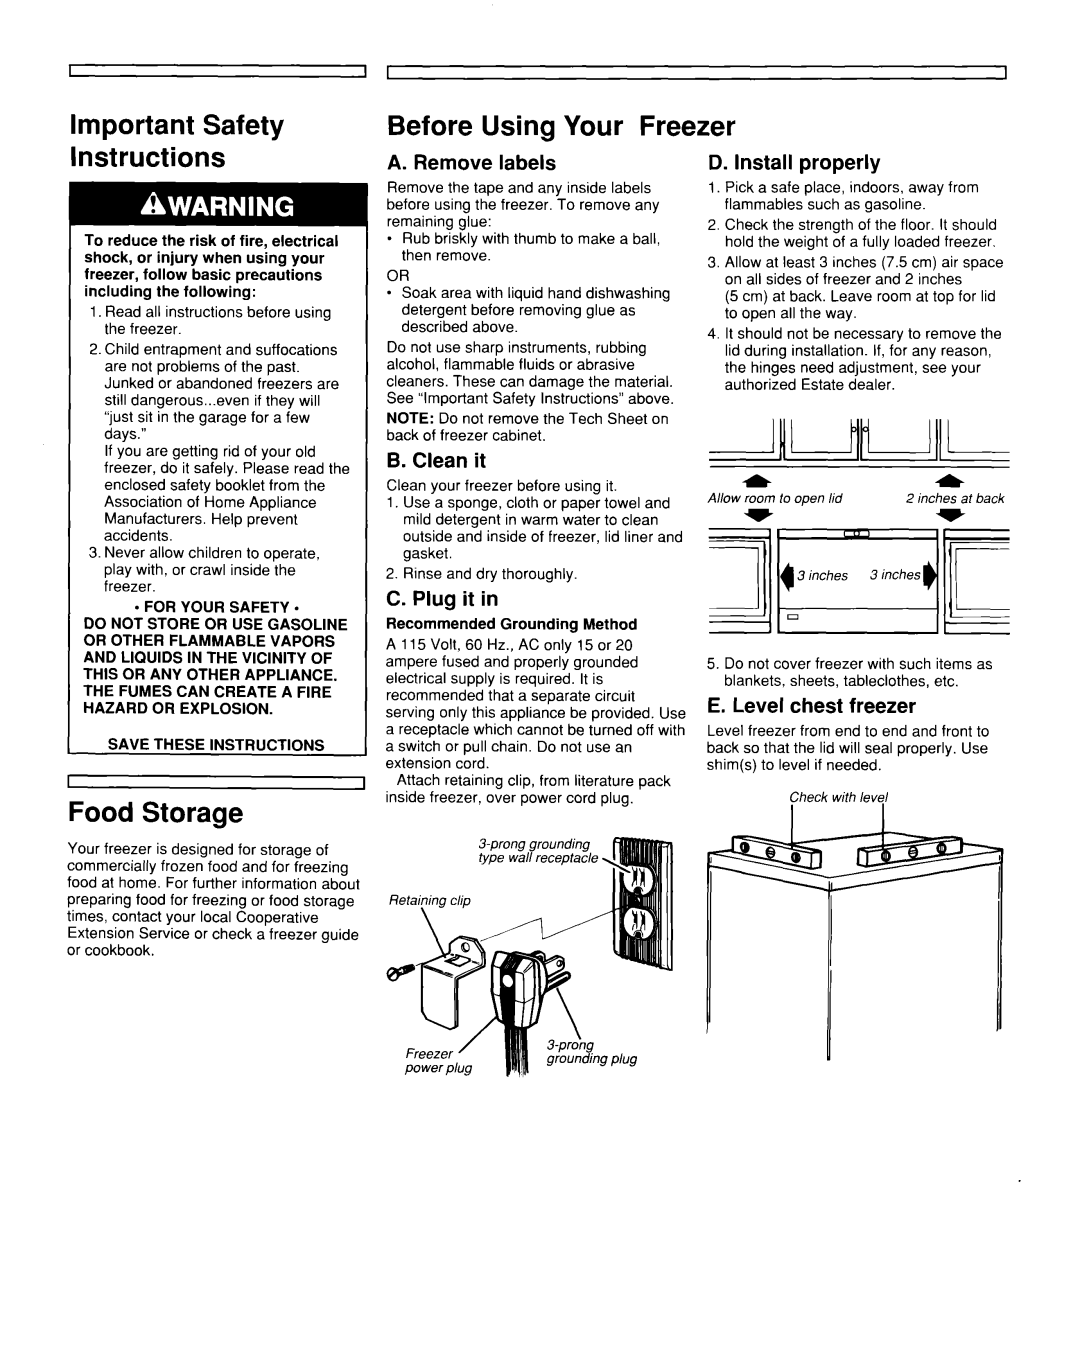 Whirlpool TCF1510W Important Safety, Before Using Your Freezer, Instructions, Food Storage, A. Remove labels, Clean it 